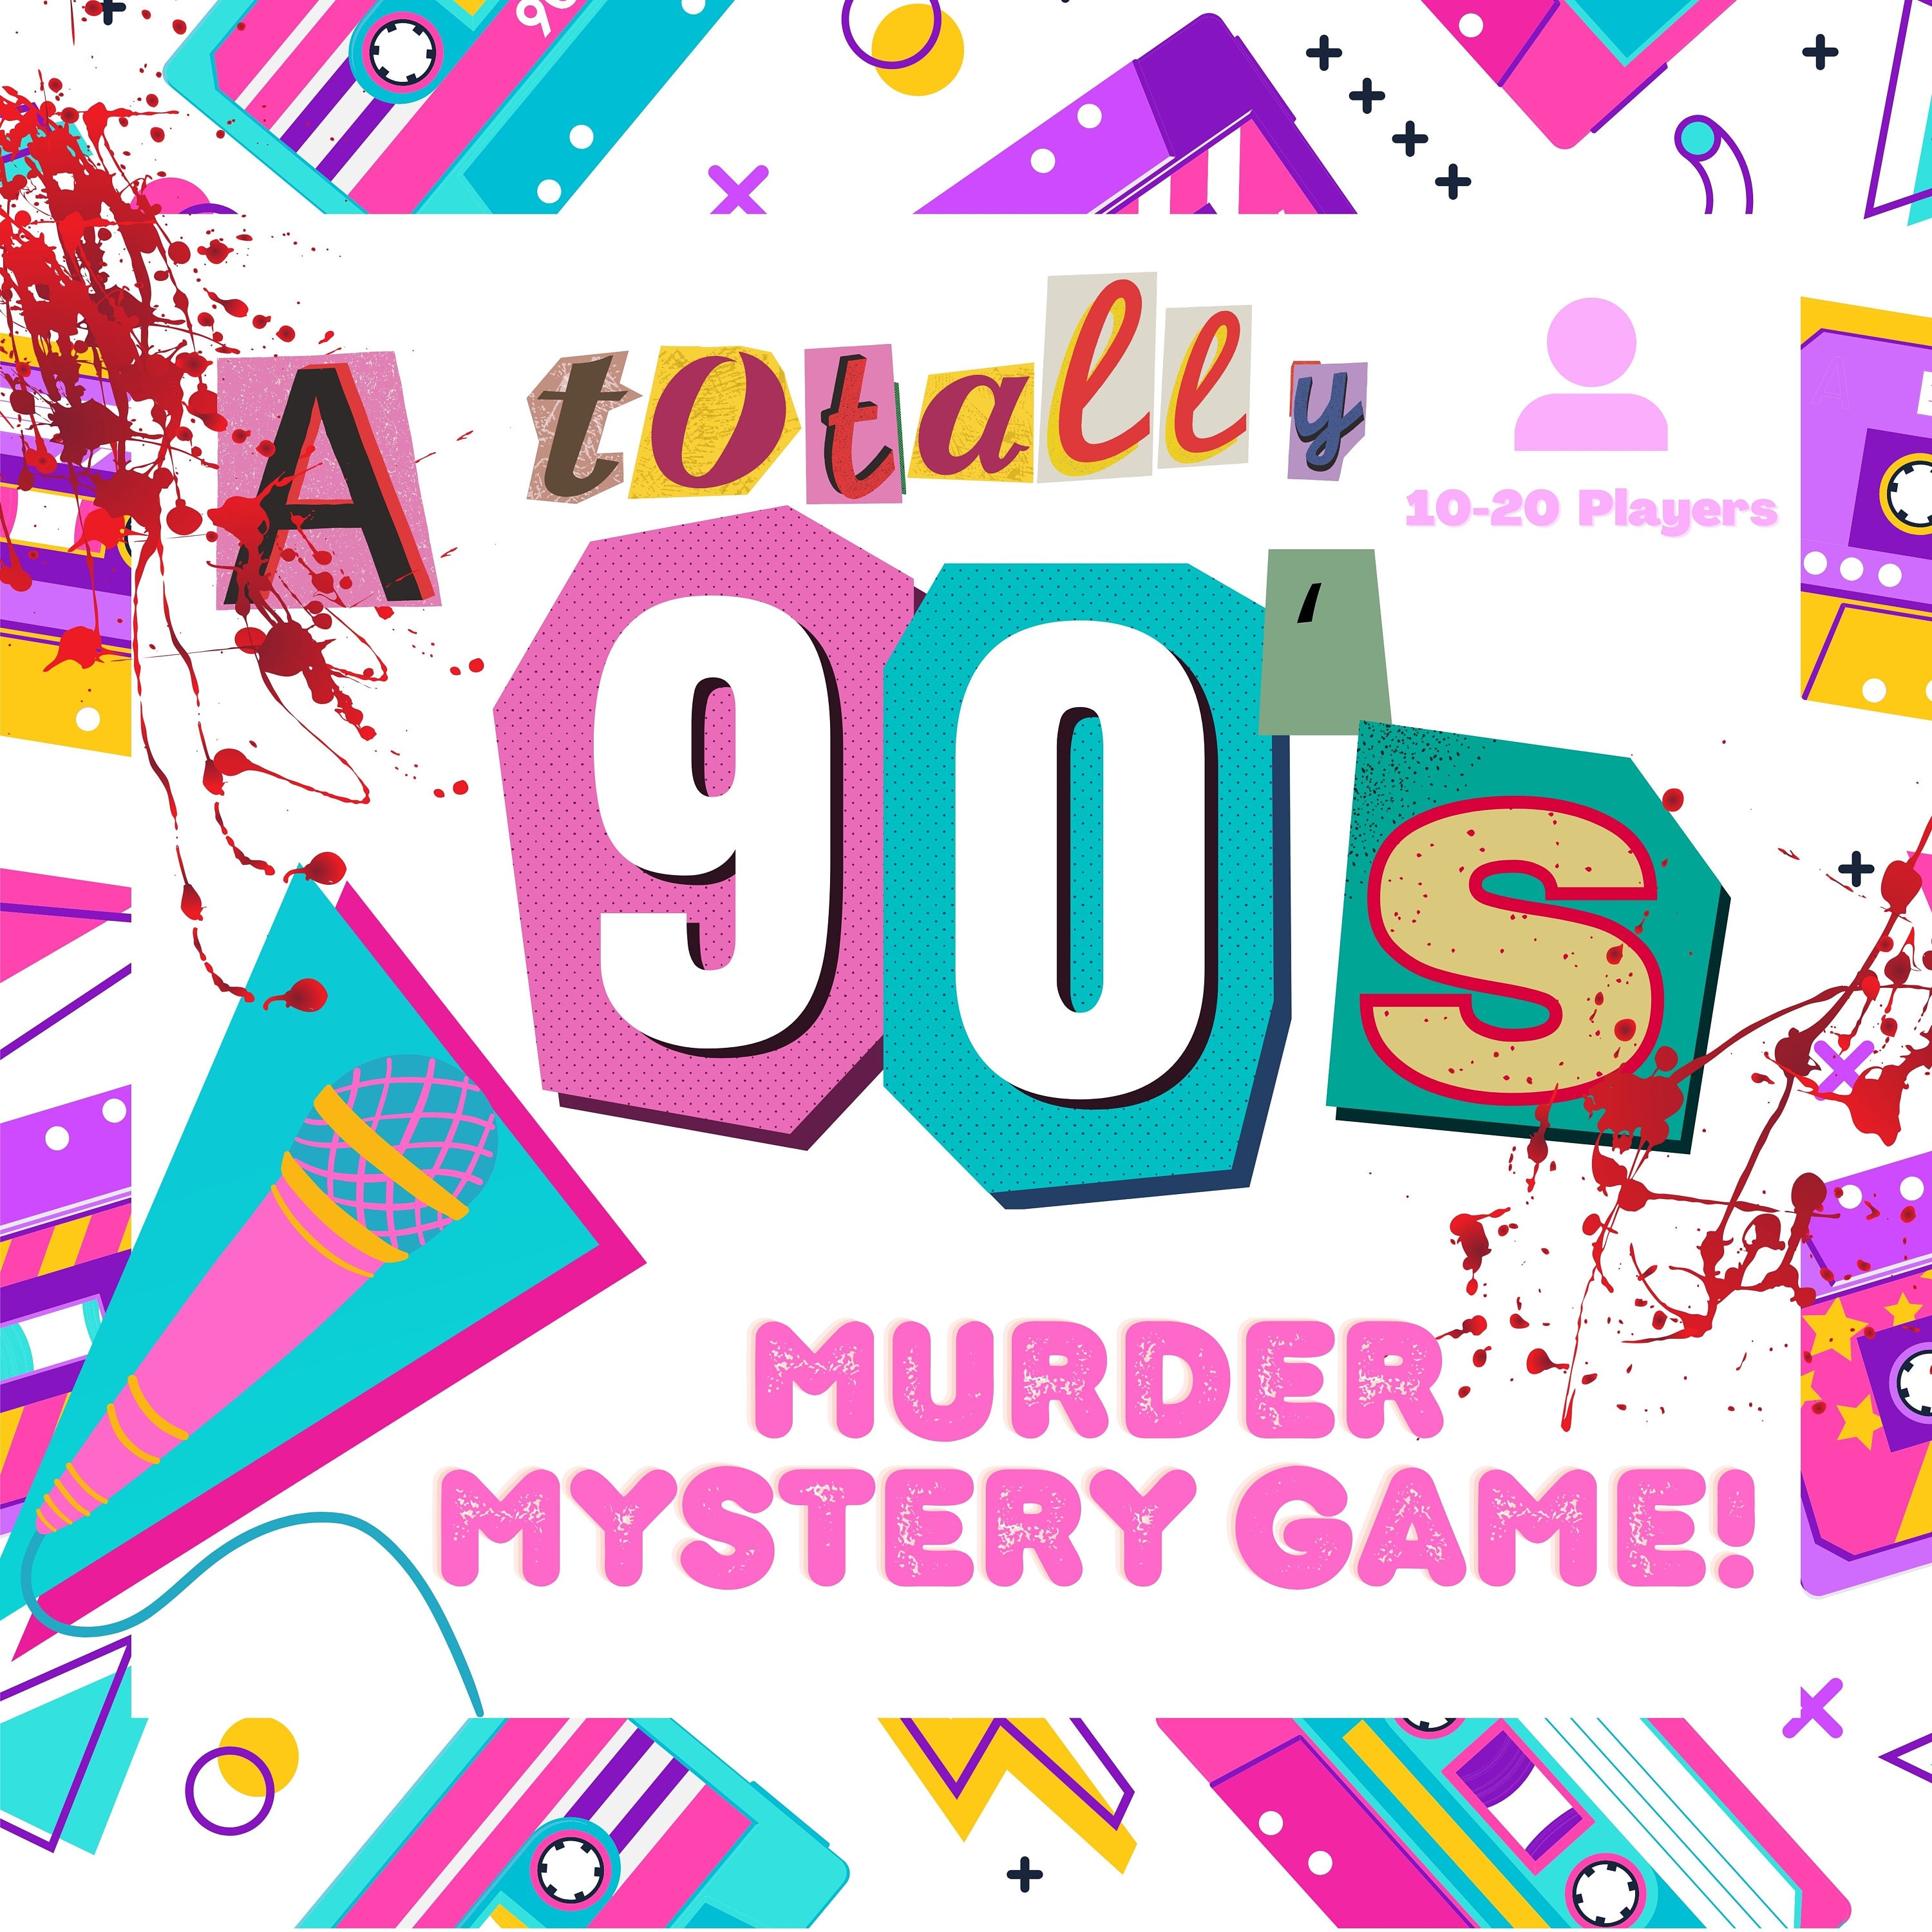  90s MEDIA Mystery Box Nostalgia Vintage Retro Gift Stickers  Grab Bag CDs DVDs PC Cartridge Video Games for Him Her : Handmade Products